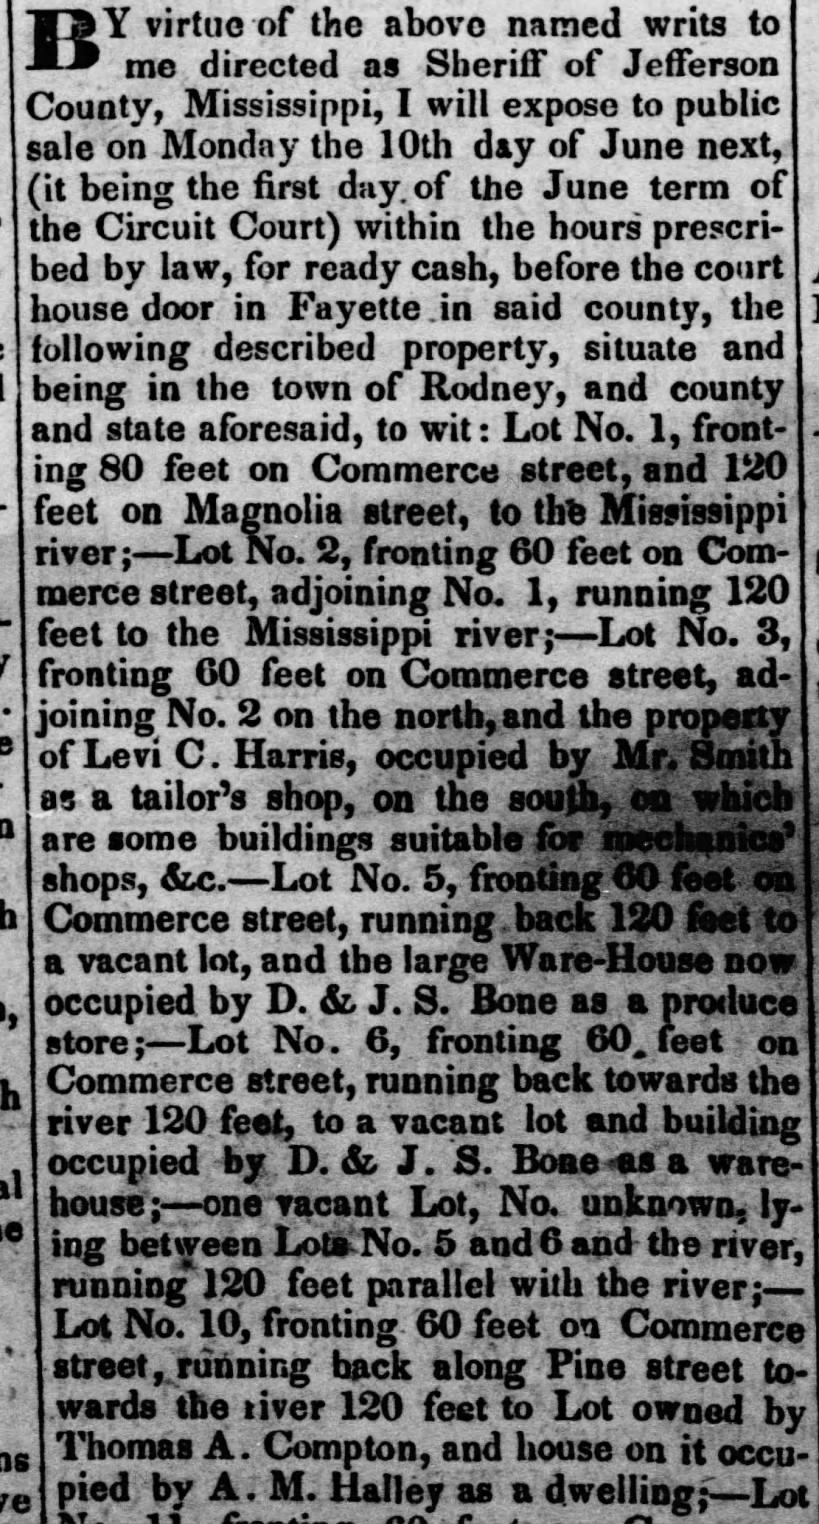 Thomas A. Compton and Levi C. Harris Owned Rodney Town Property at the Same Time - 1 May 1840